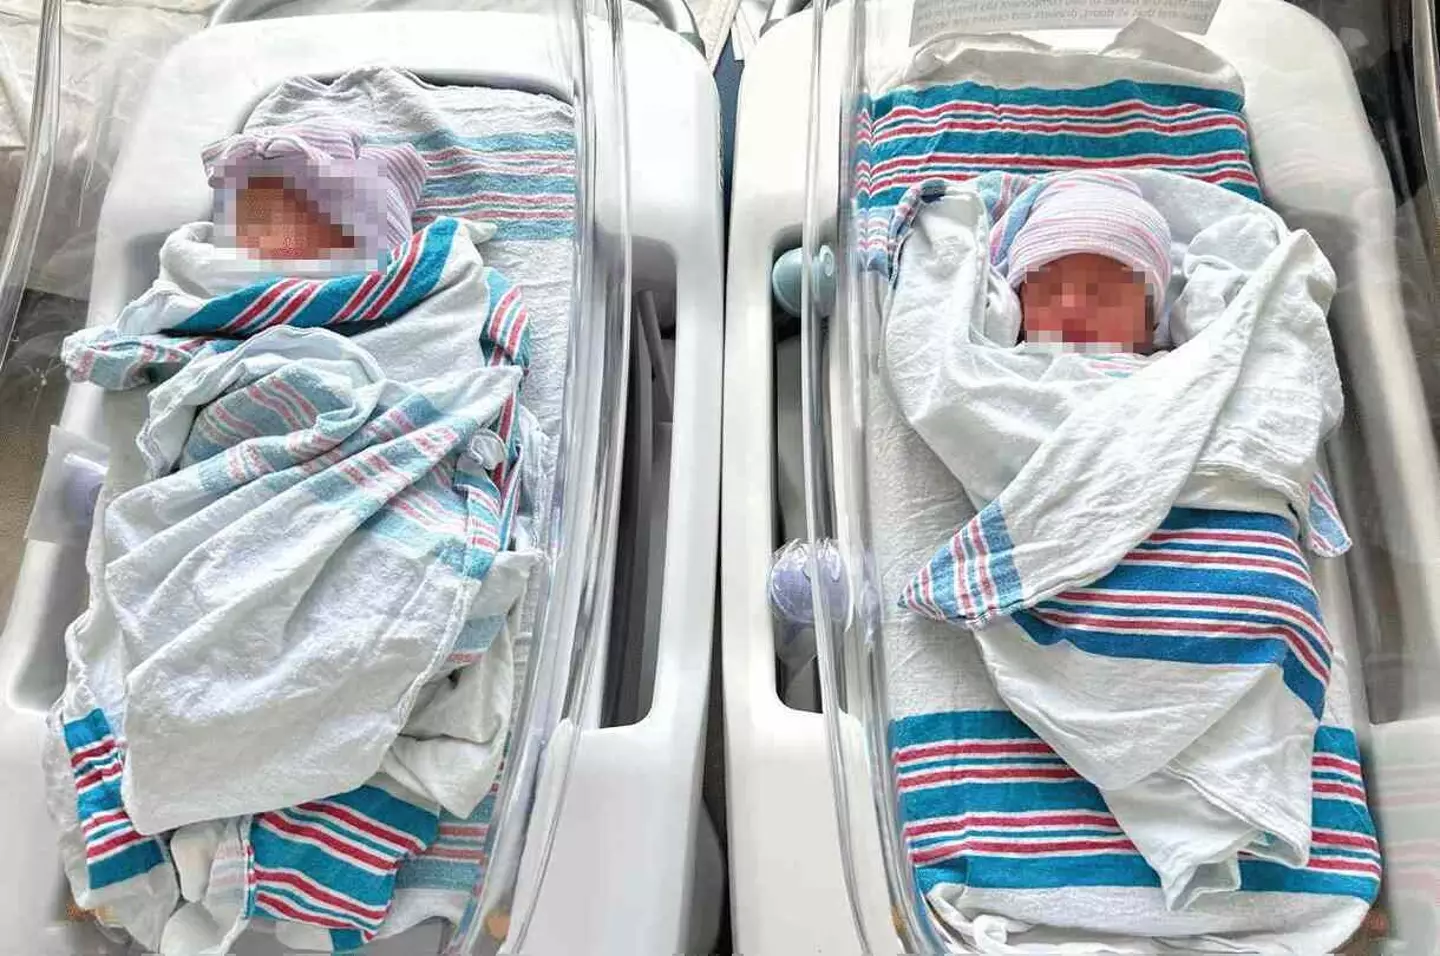 The couple asked doctors to deliver the babies after midnight.